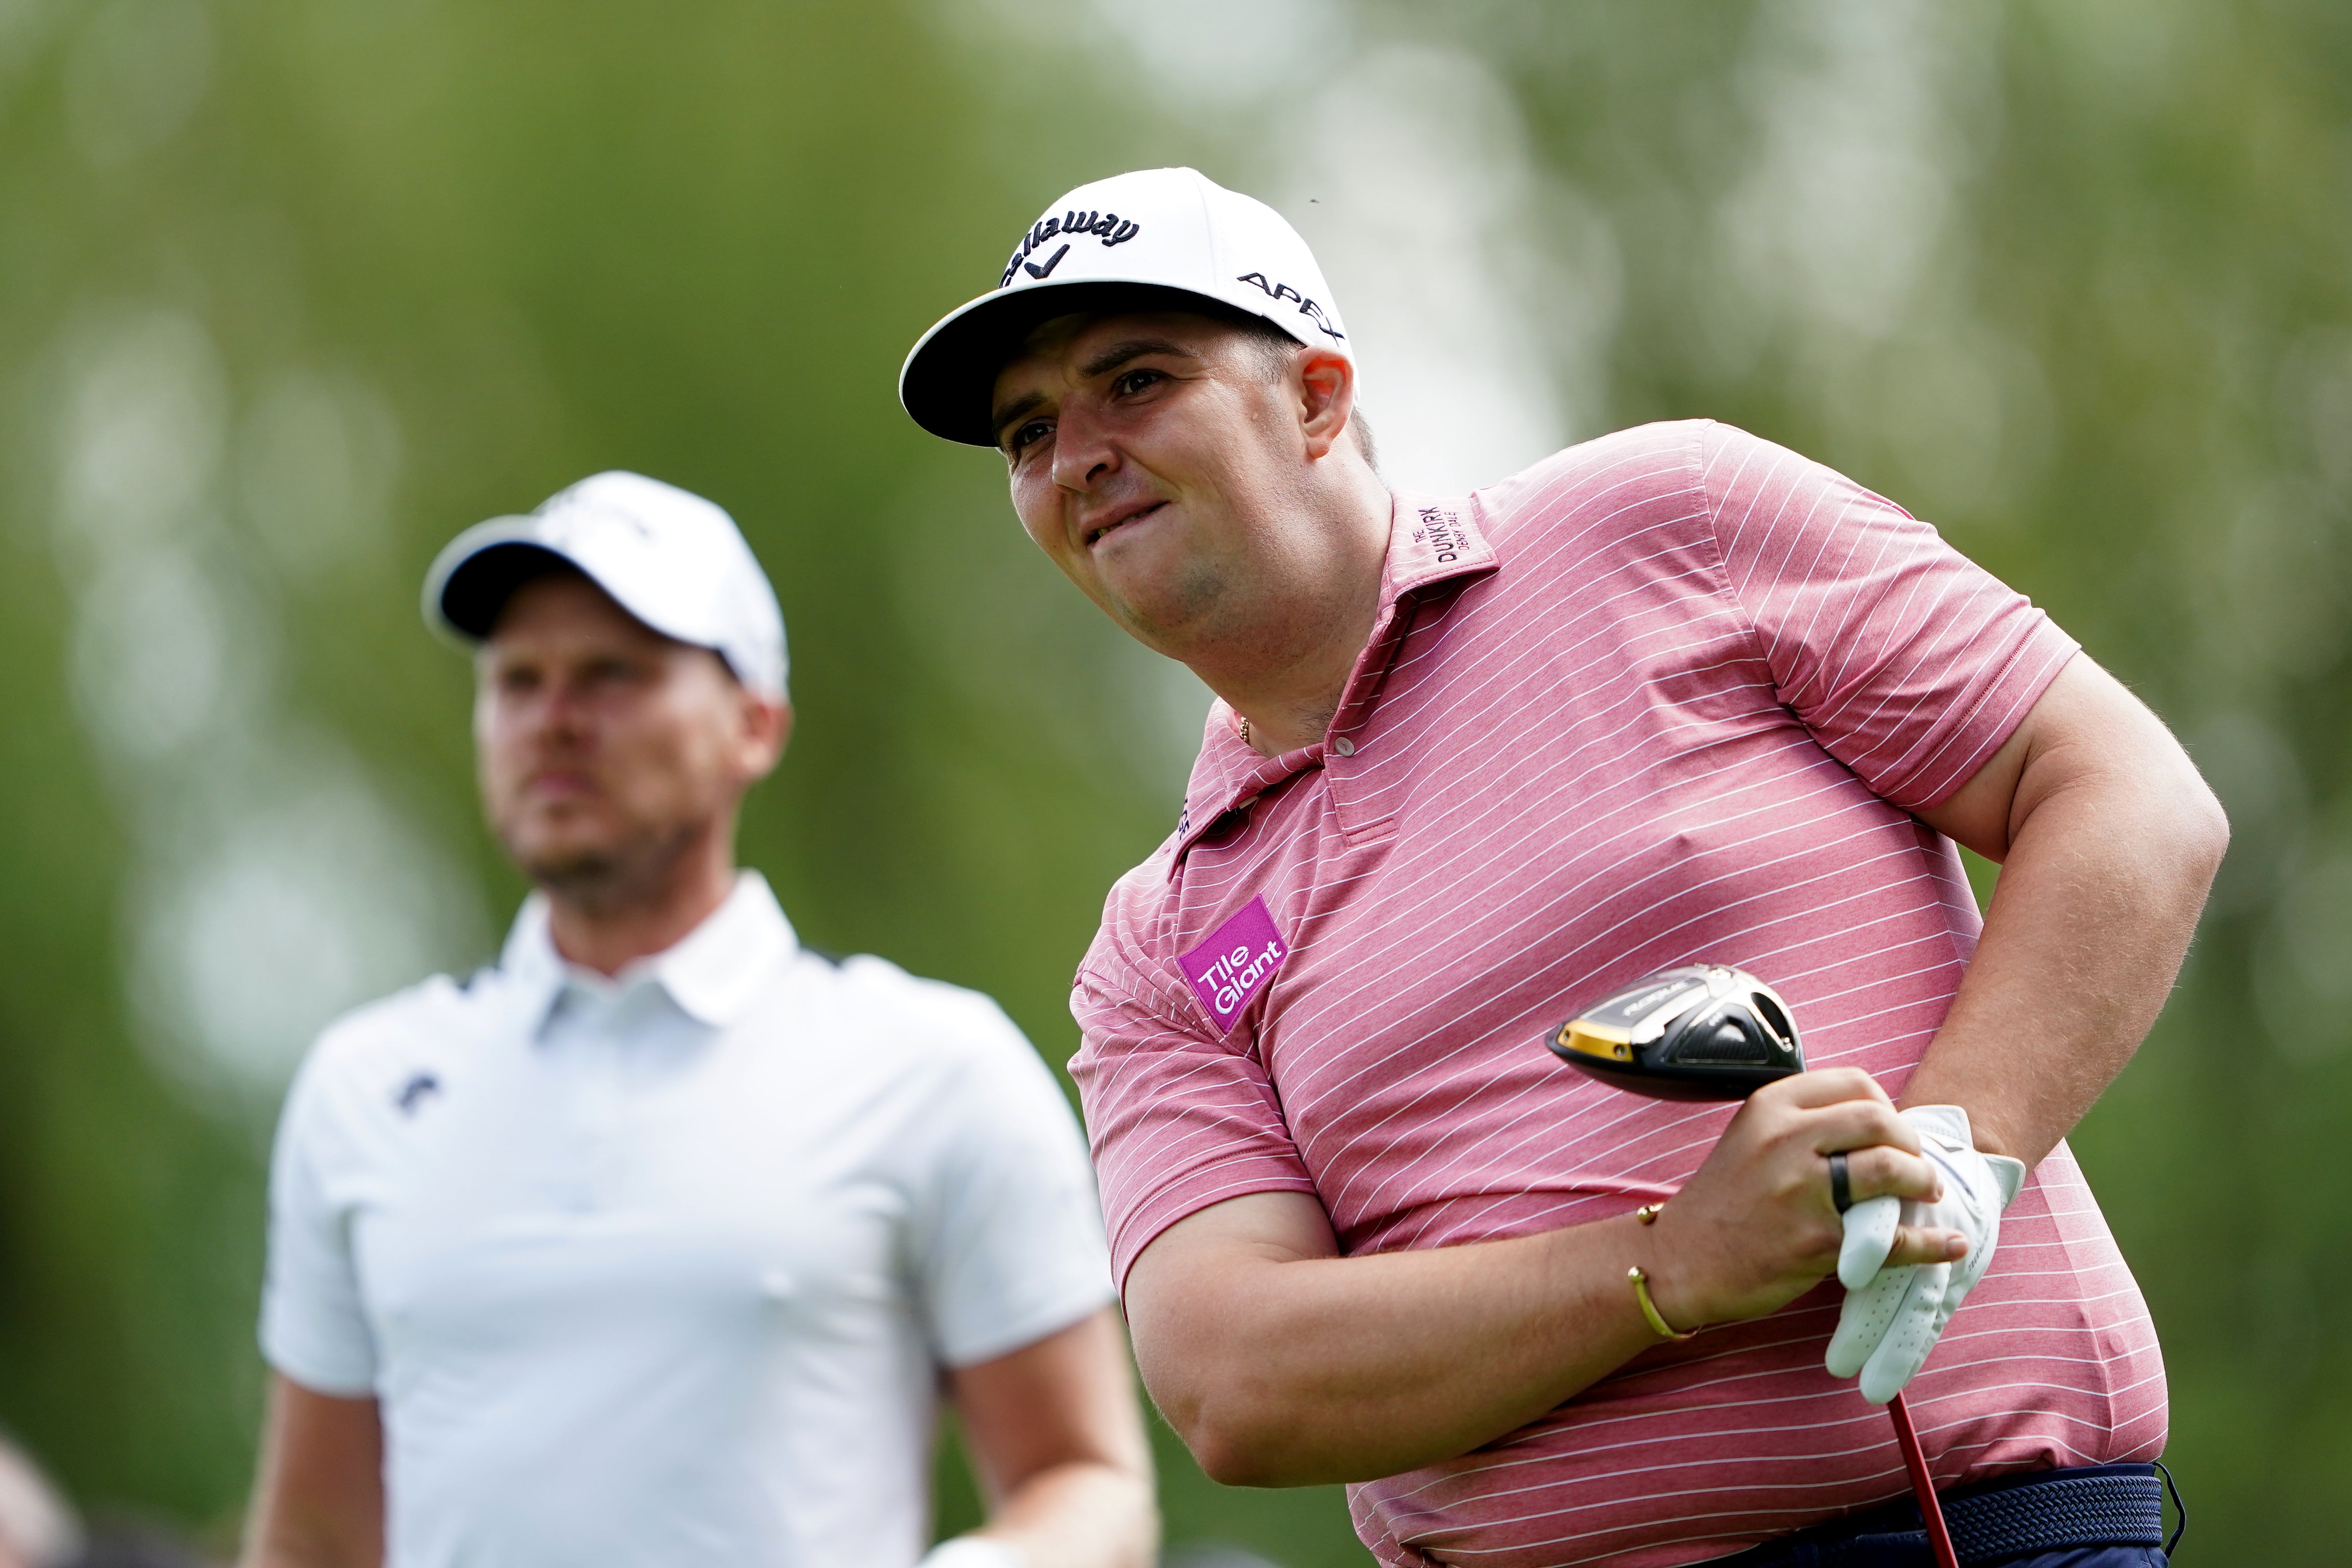 Marcus Armitage (right) and Danny Willett (left) enjoyed contrasting fortunes on the 18th in round three of the Betfred British Masters (Zac Goodwin/PA)